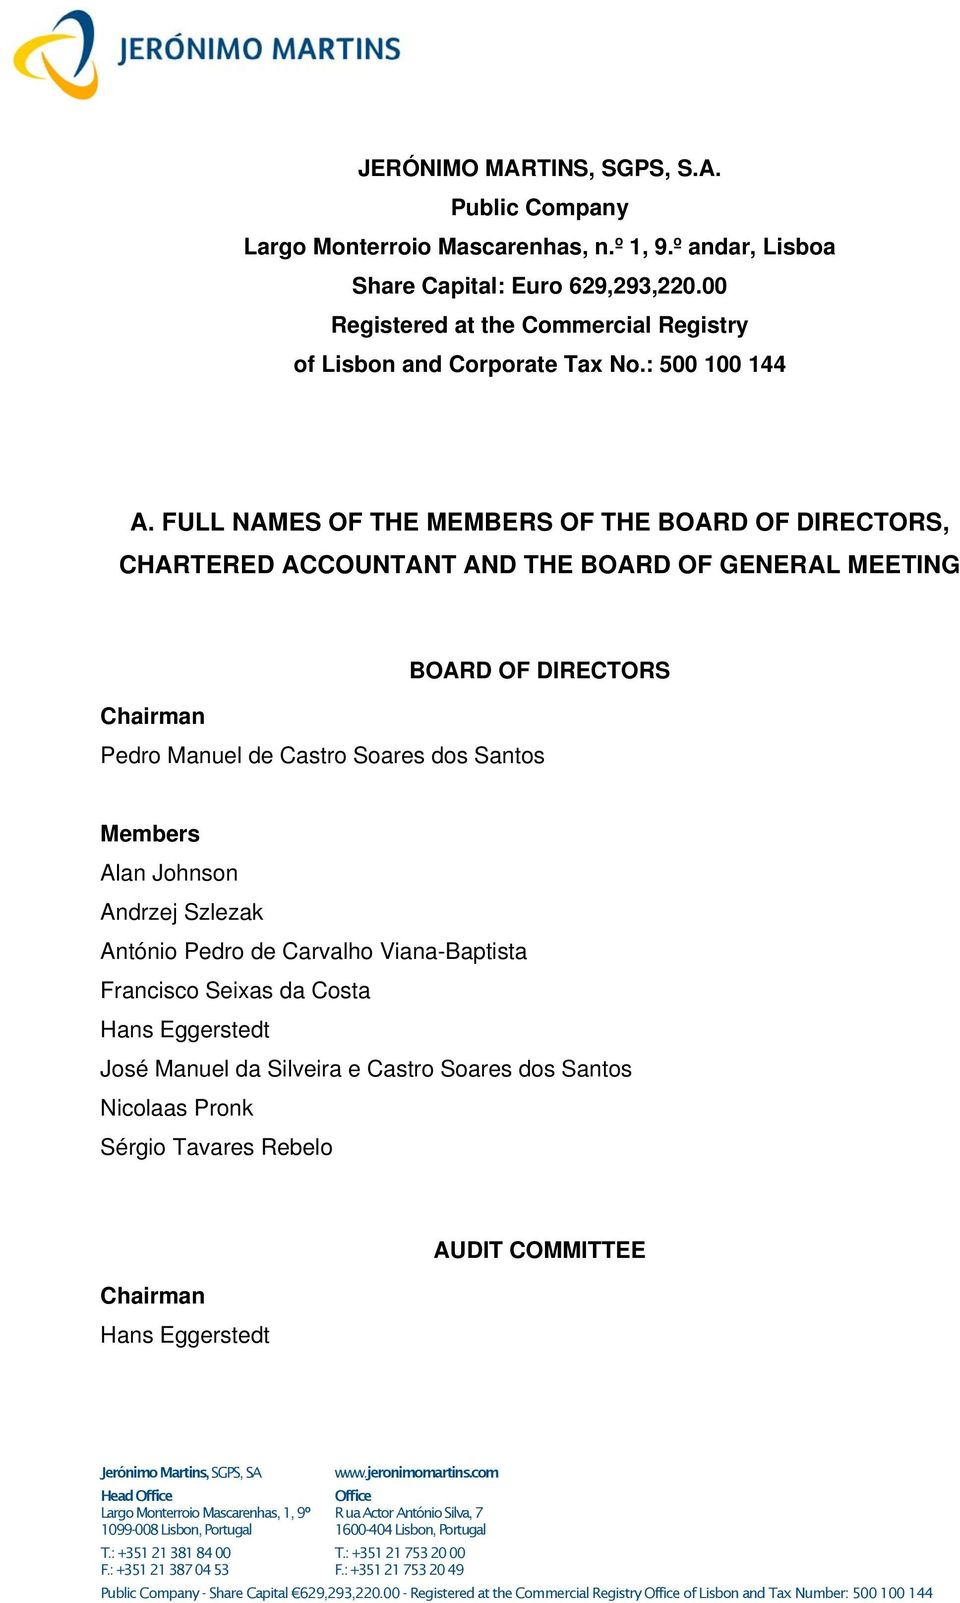 FULL NAMES OF THE MEMBERS OF THE BOARD OF DIRECTORS, CHARTERED ACCOUNTANT AND THE BOARD OF GENERAL MEETING BOARD OF DIRECTORS Chairman Pedro Manuel de Castro Soares dos Santos Members